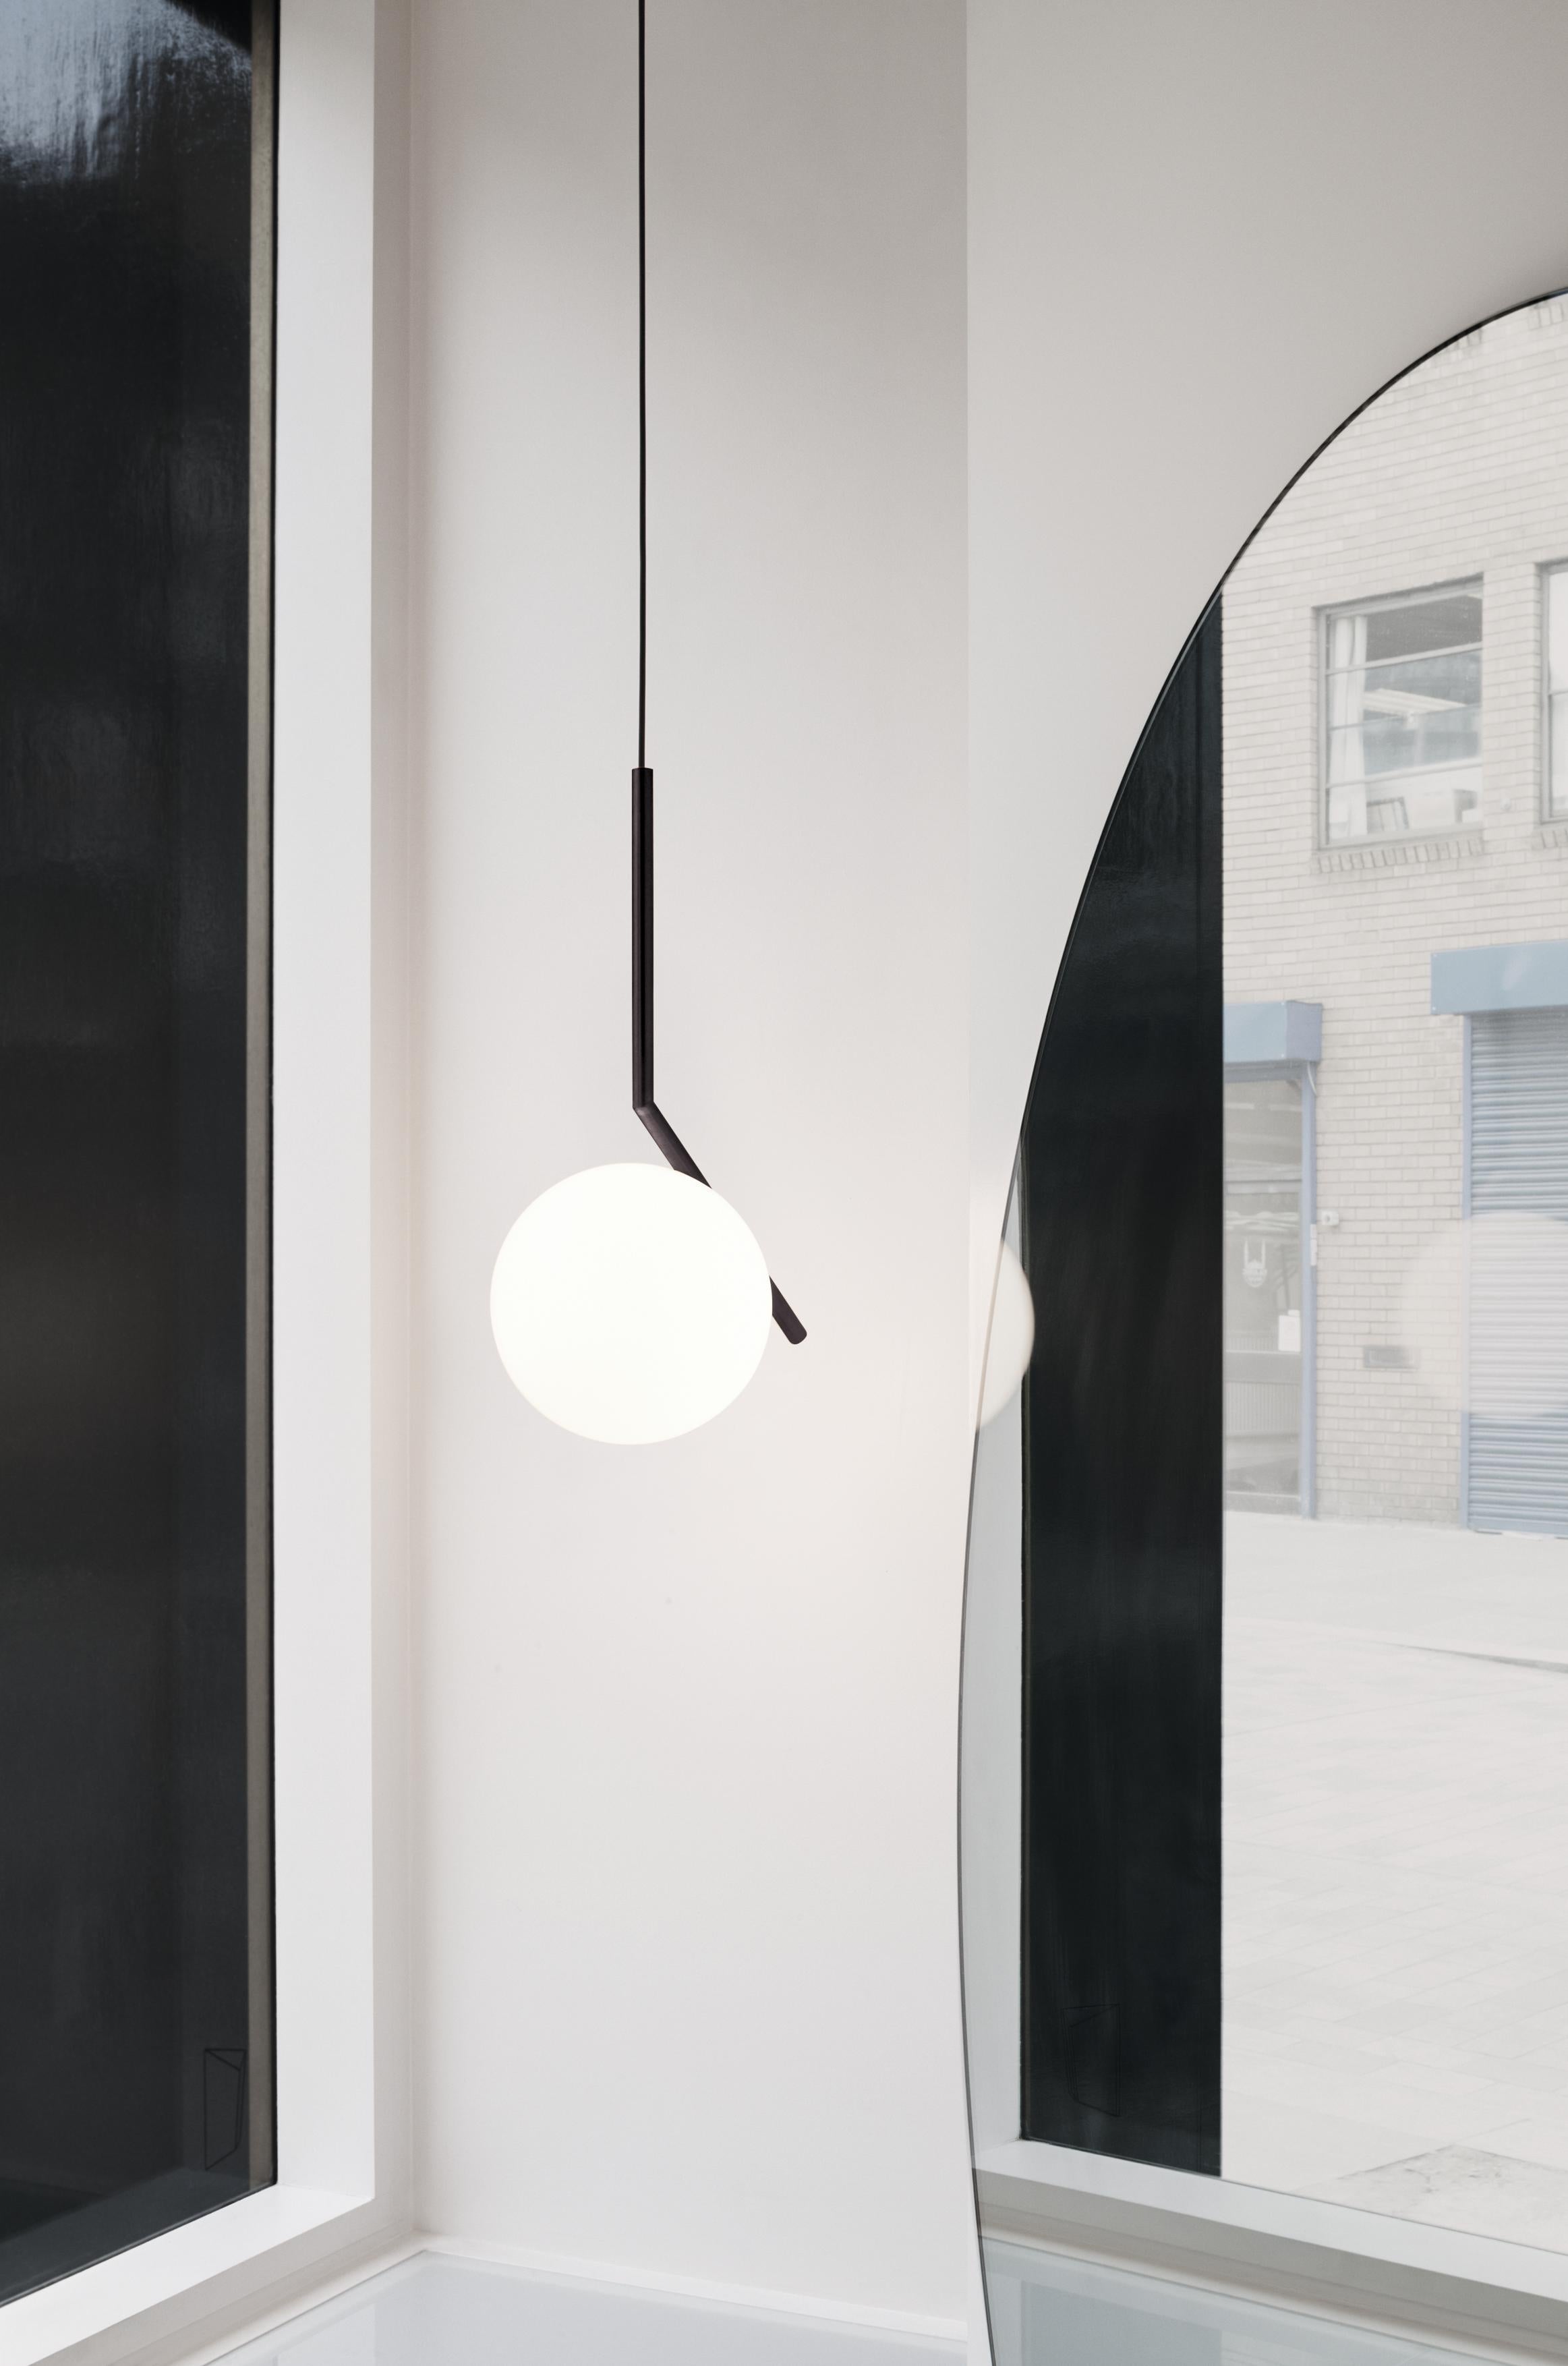 FLOS IC Lights S1 Pendant Light in Black by Michael Anastassiades

Like the other pieces in his IC Light Series, the IC Lights S balances designer Michael Anastassiades’ love of industrial simplicity with intricate symbolism. Providing diffused